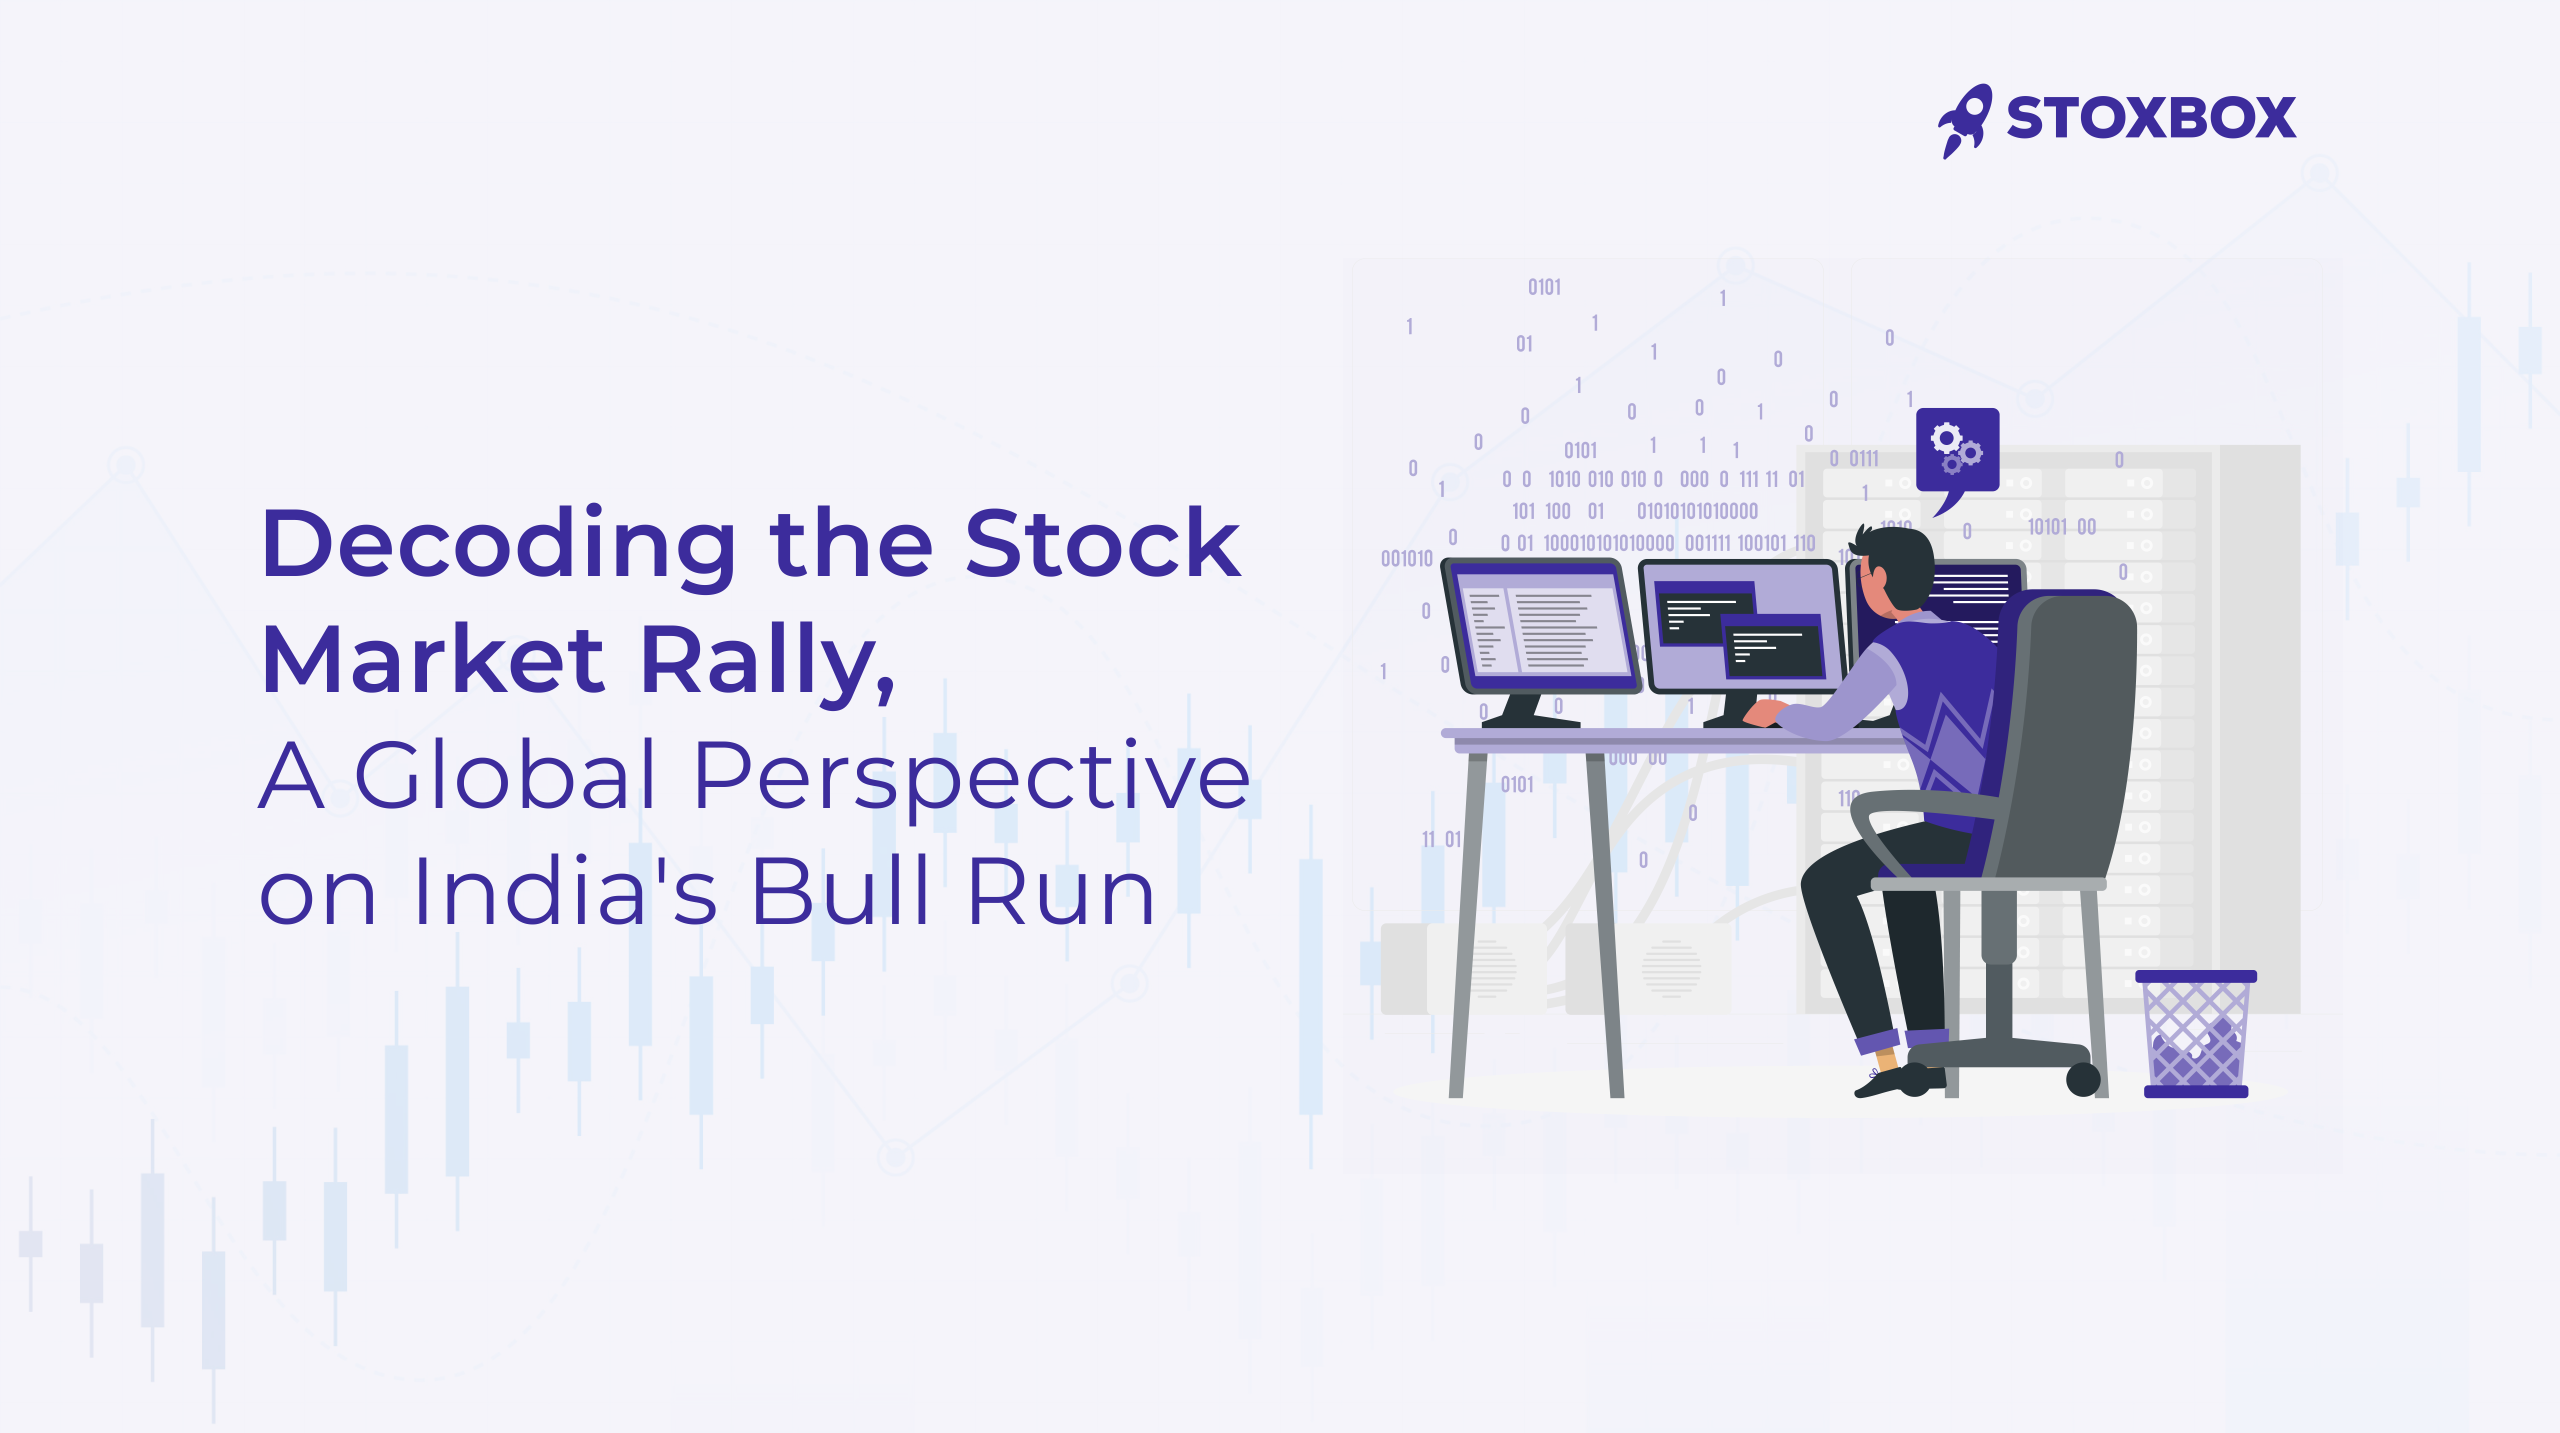 Decoding the Stock Market Rally: A Global Perspective on India’s Bull Run